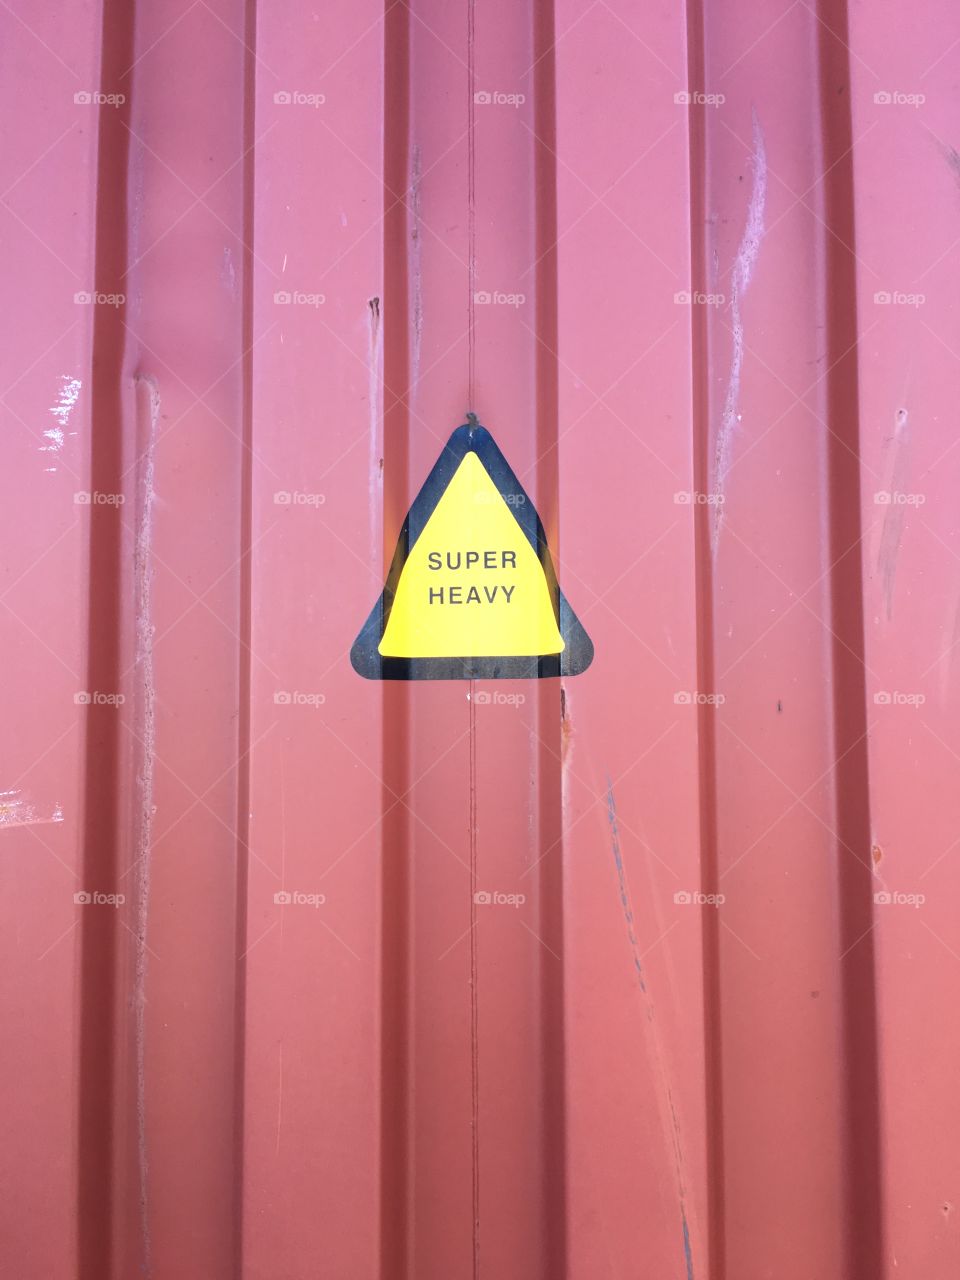 Super heavy sign on cargo container